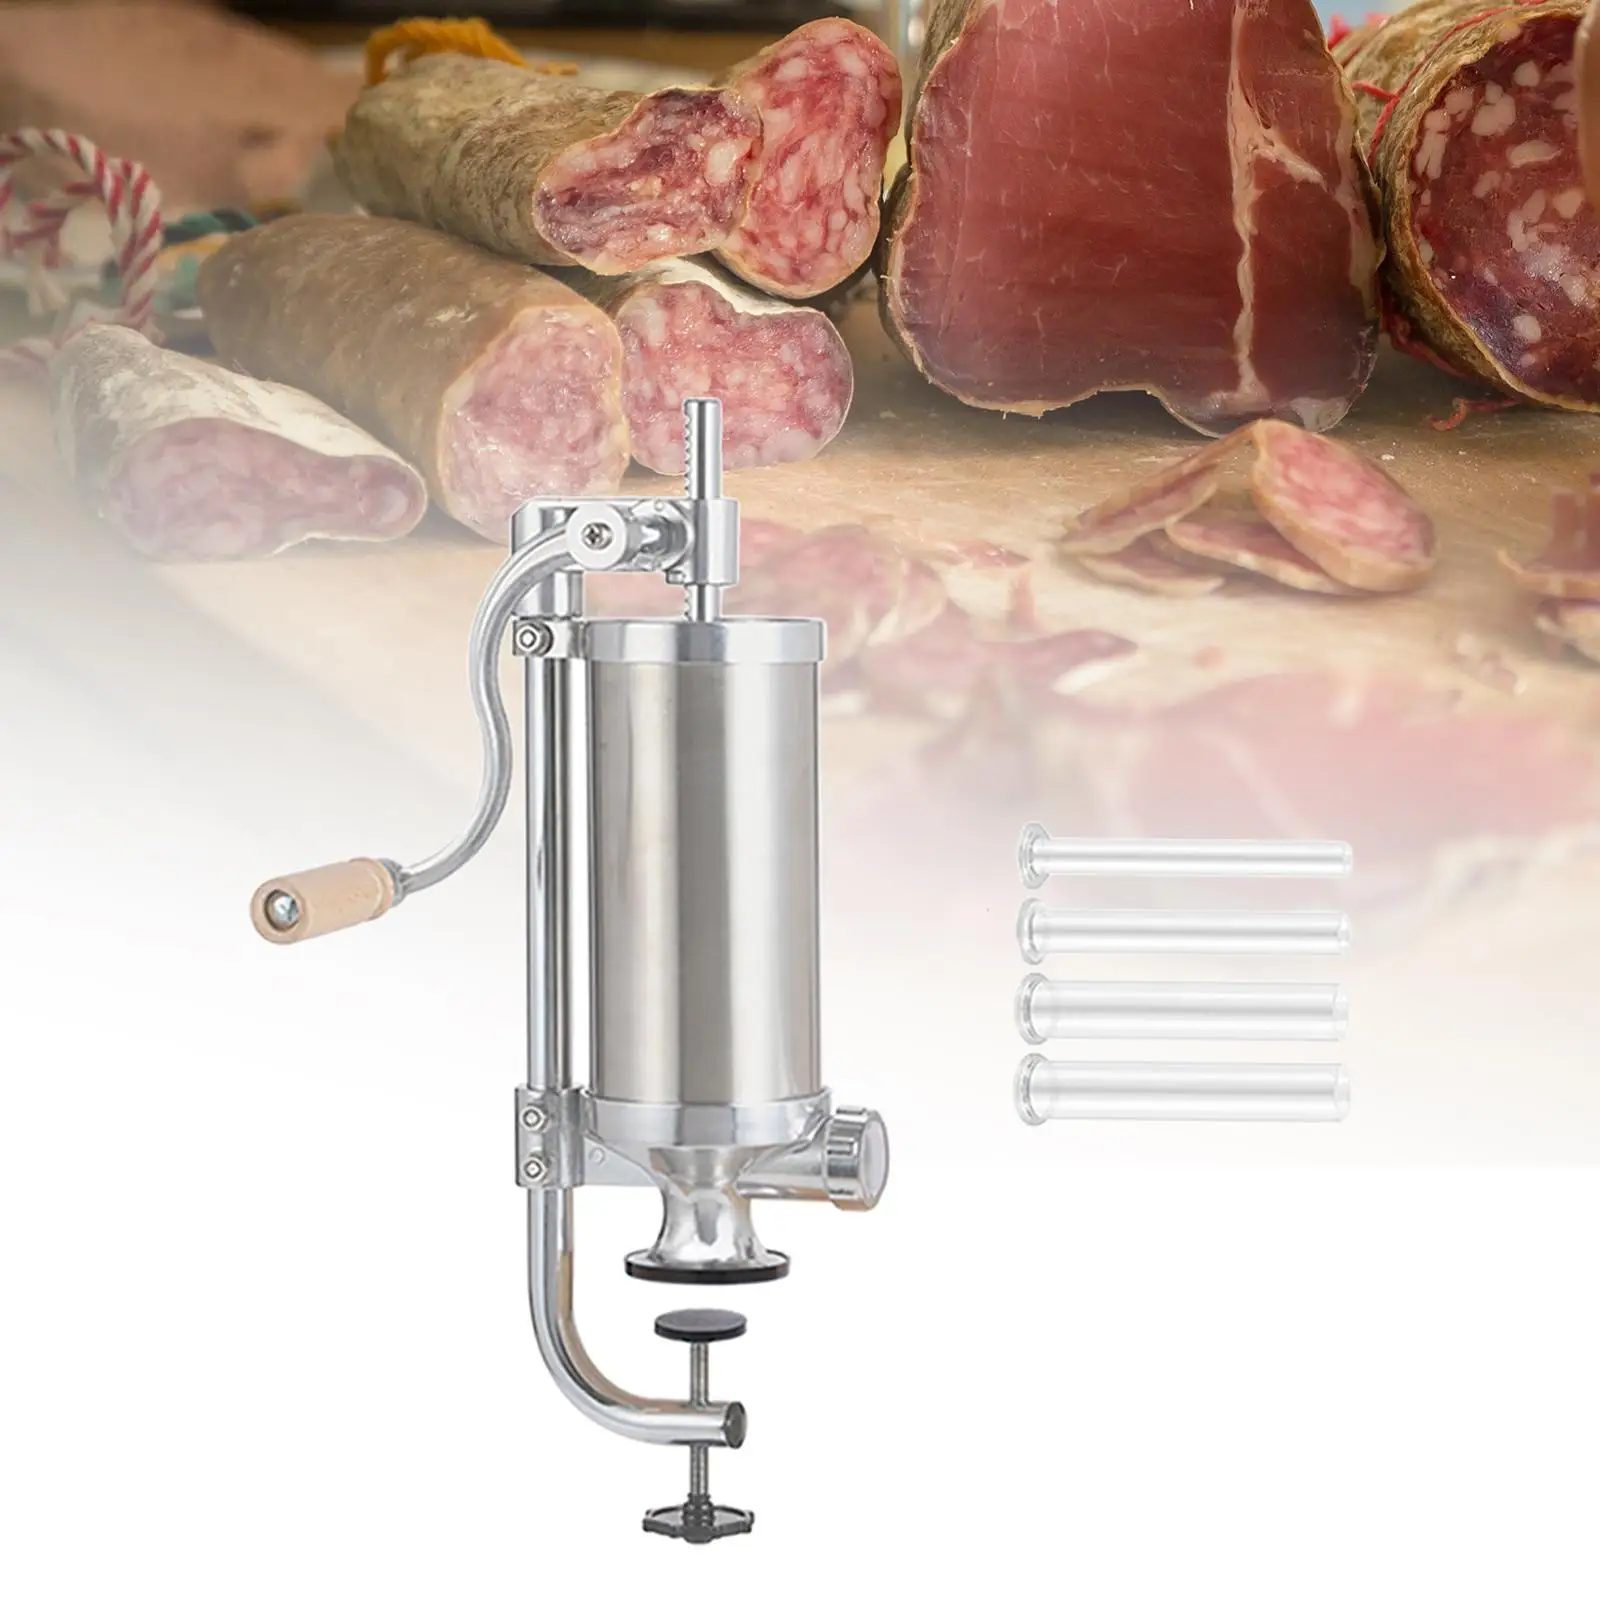 Sausage Maker 2.5lbs 4 Sausage Nozzle Attachments Effective Household Stainless Steel Sausage Filling Tools Meat Filler Stuffer